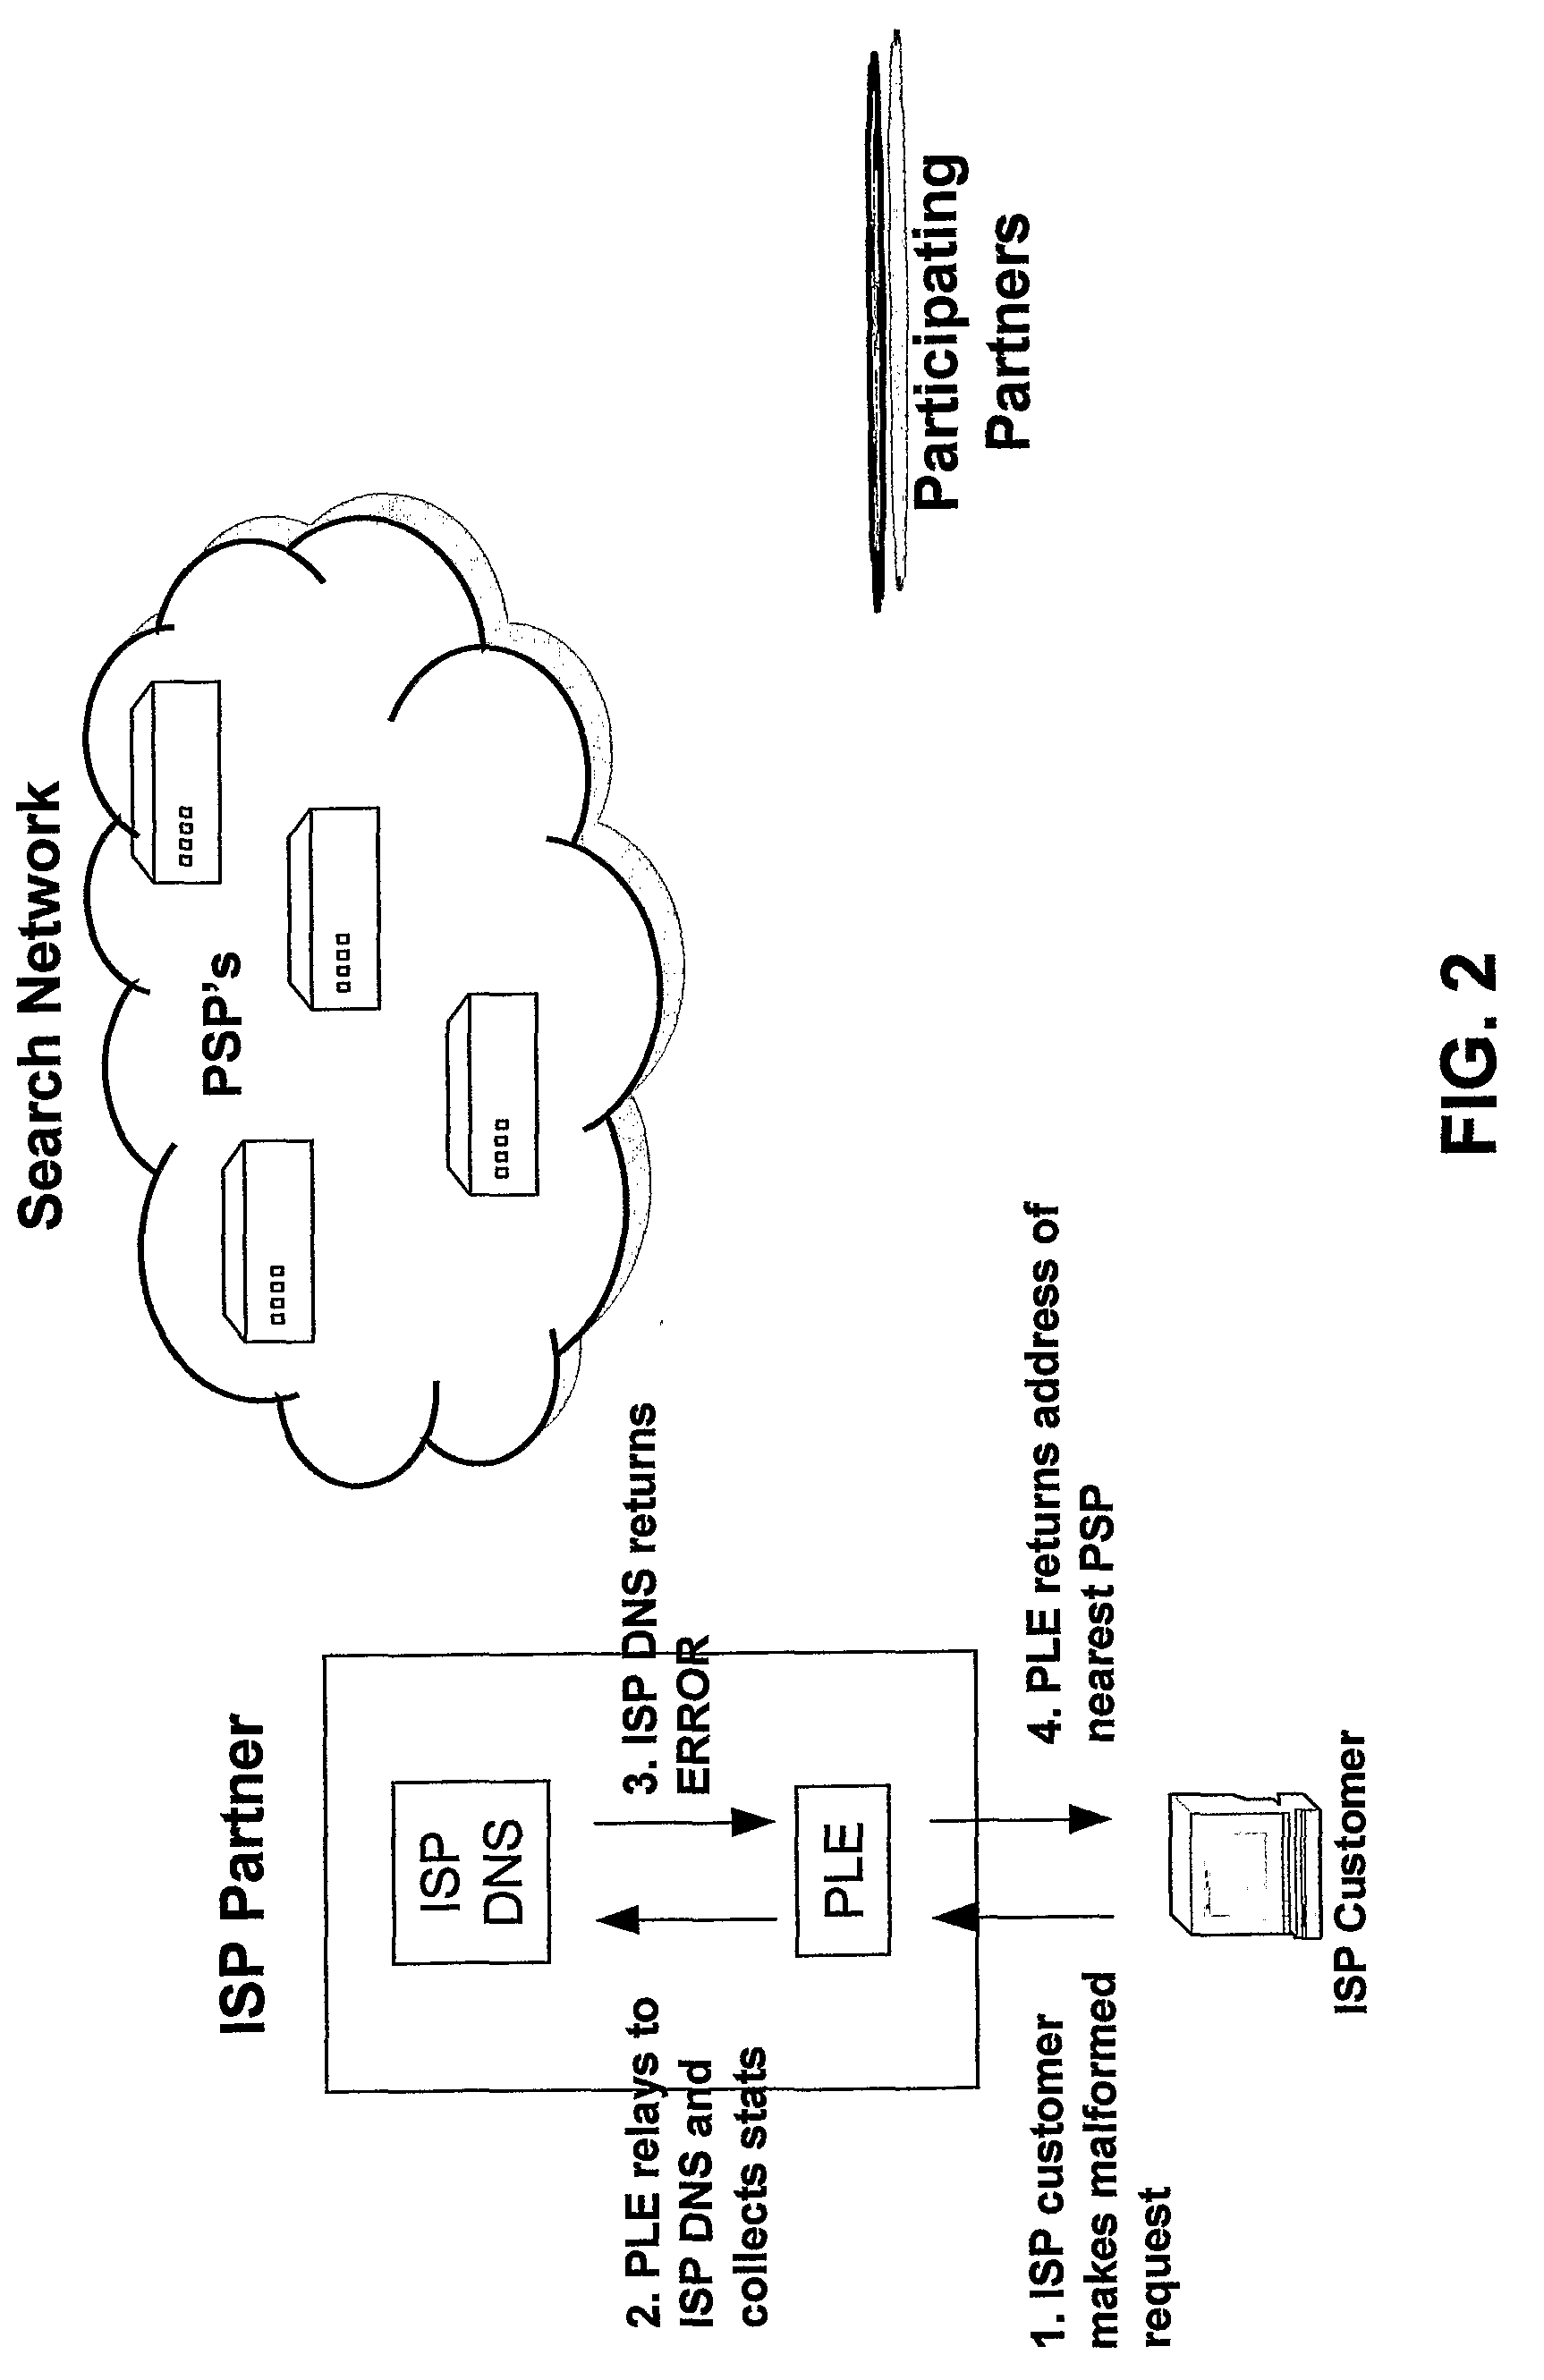 Systems and Methods for Direction of Communication Traffic